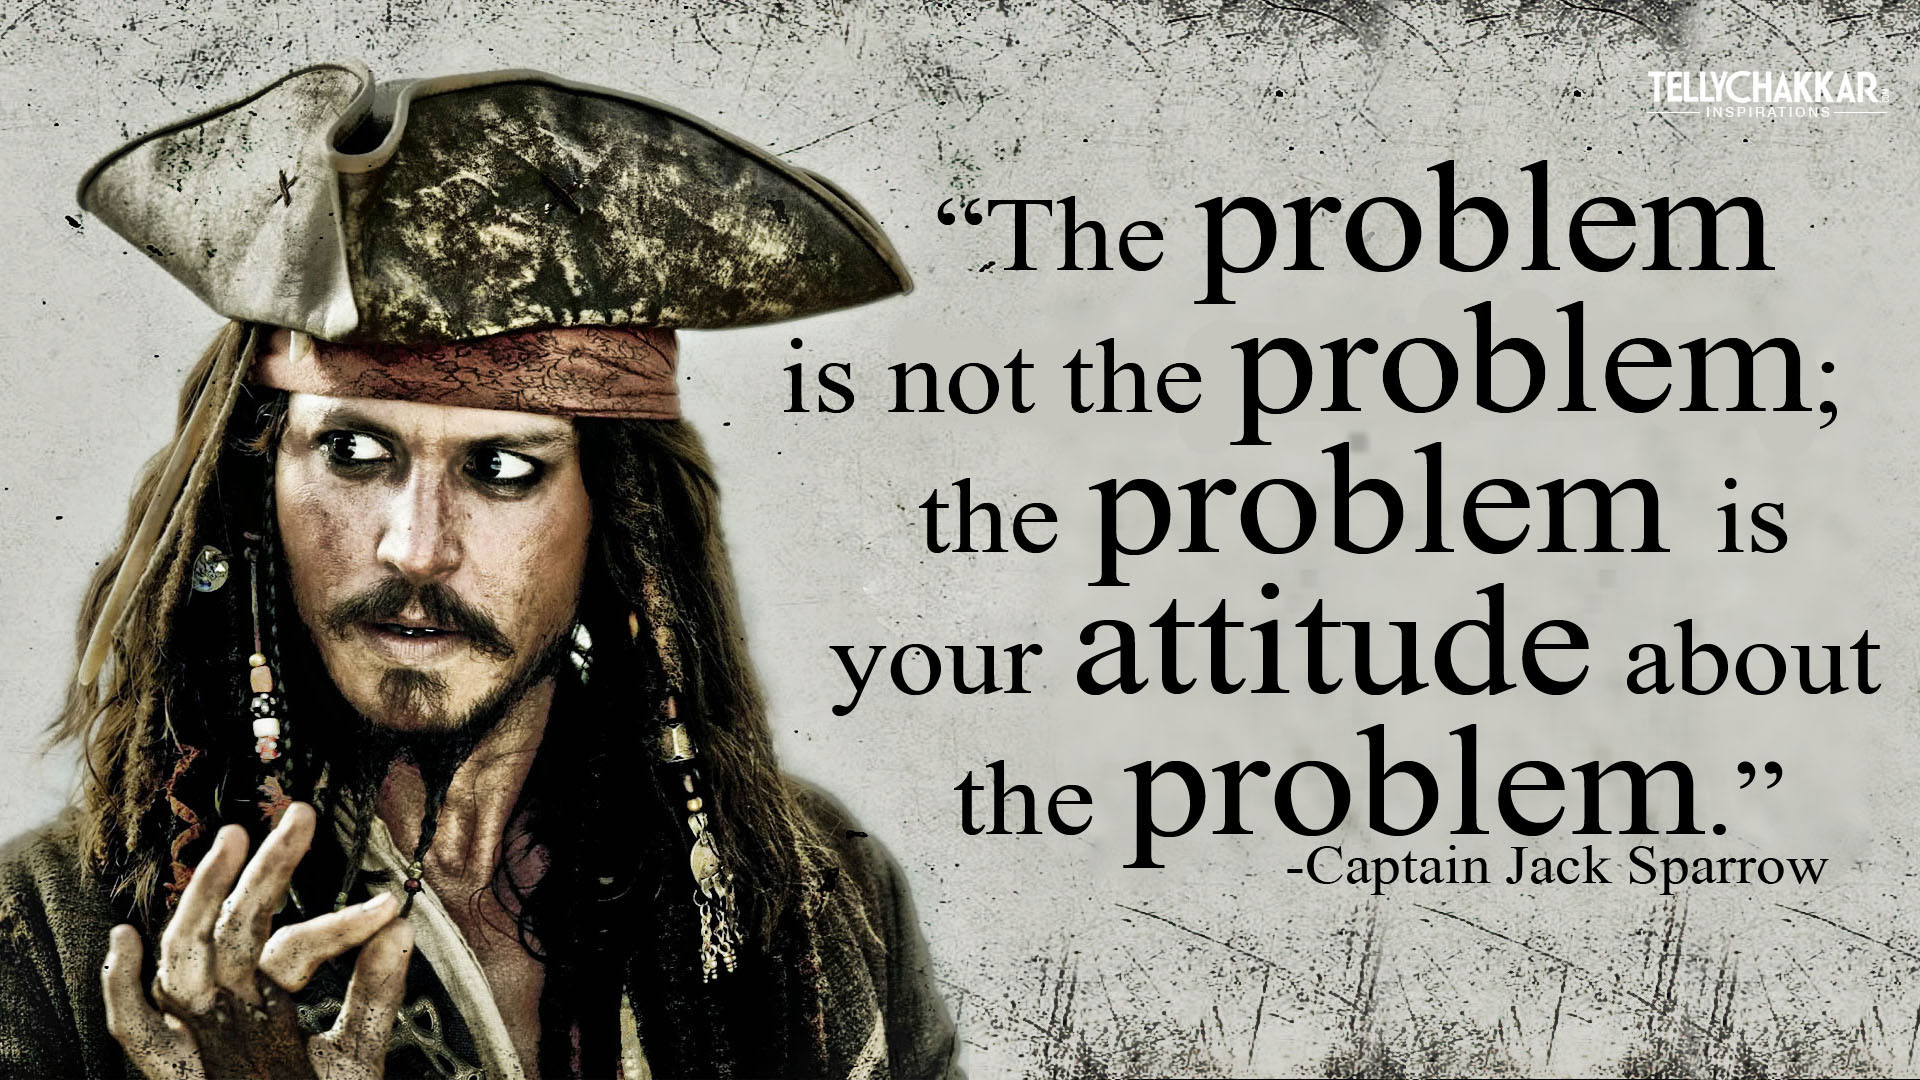 jack sparrow wallpaper with quotes